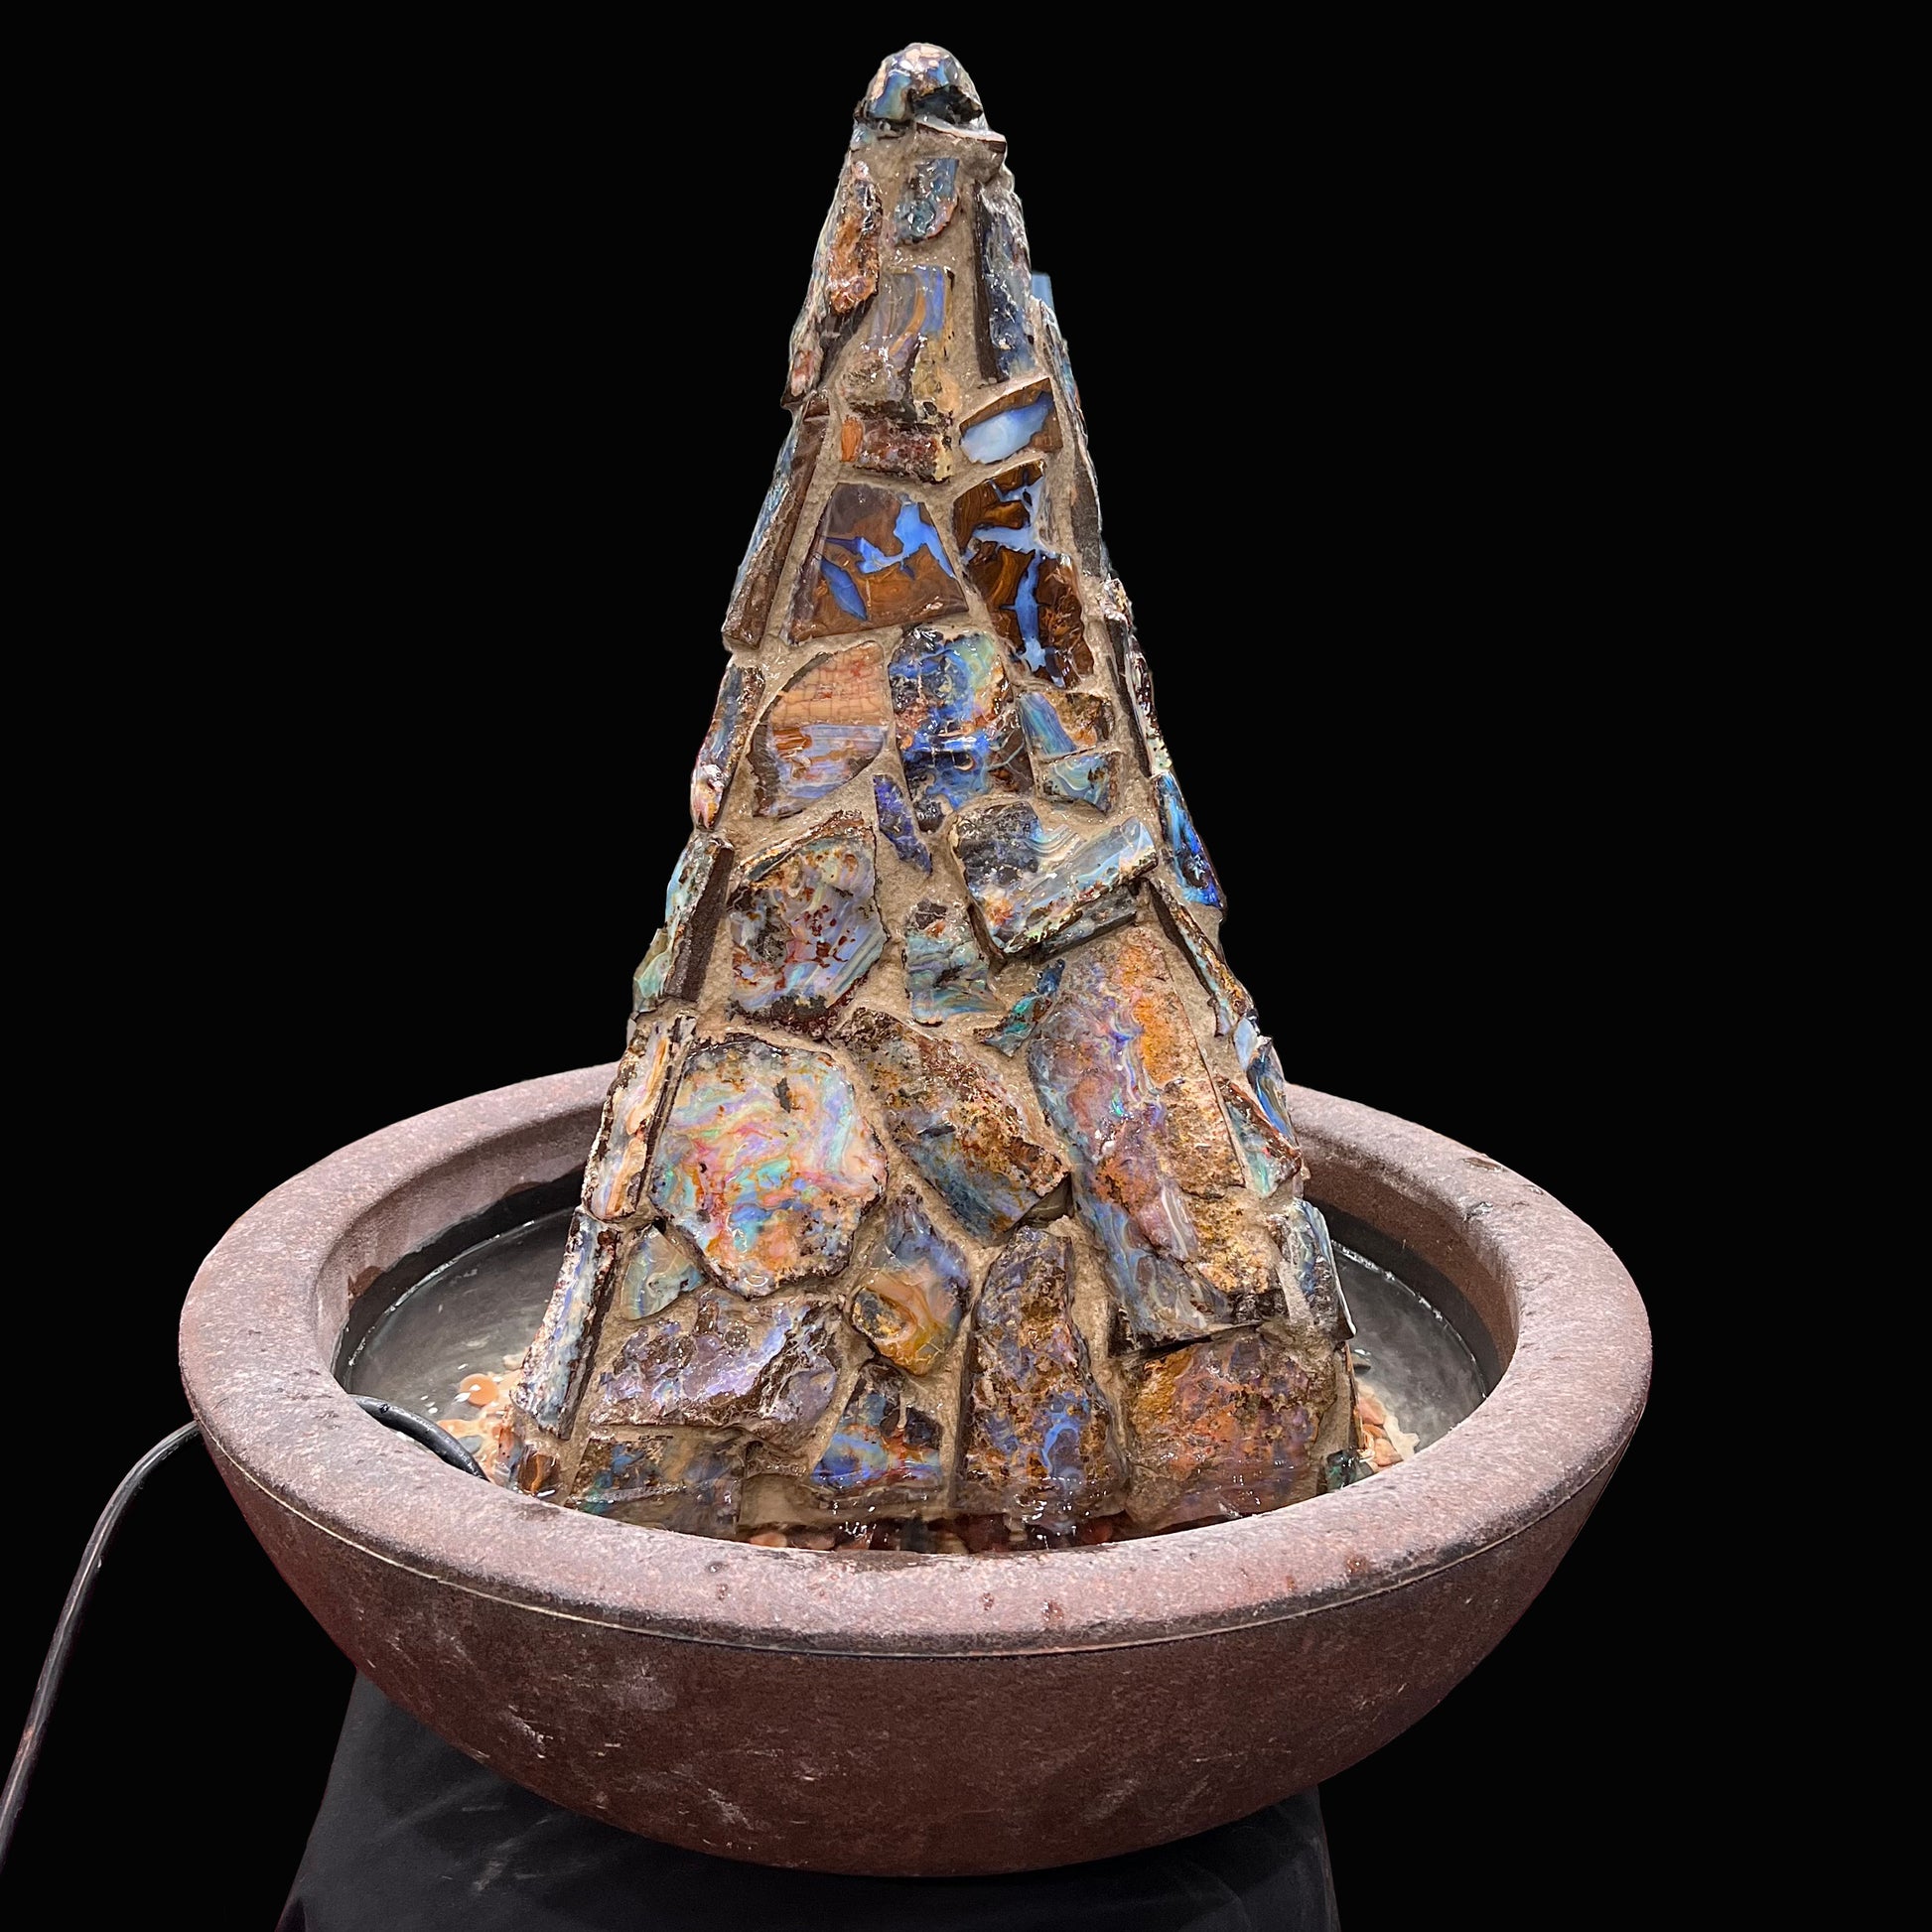 An indoor/outdoor three sided pyramid fountain made from Australian boulder opal, sitting in a bowl of Mexican fire opal.